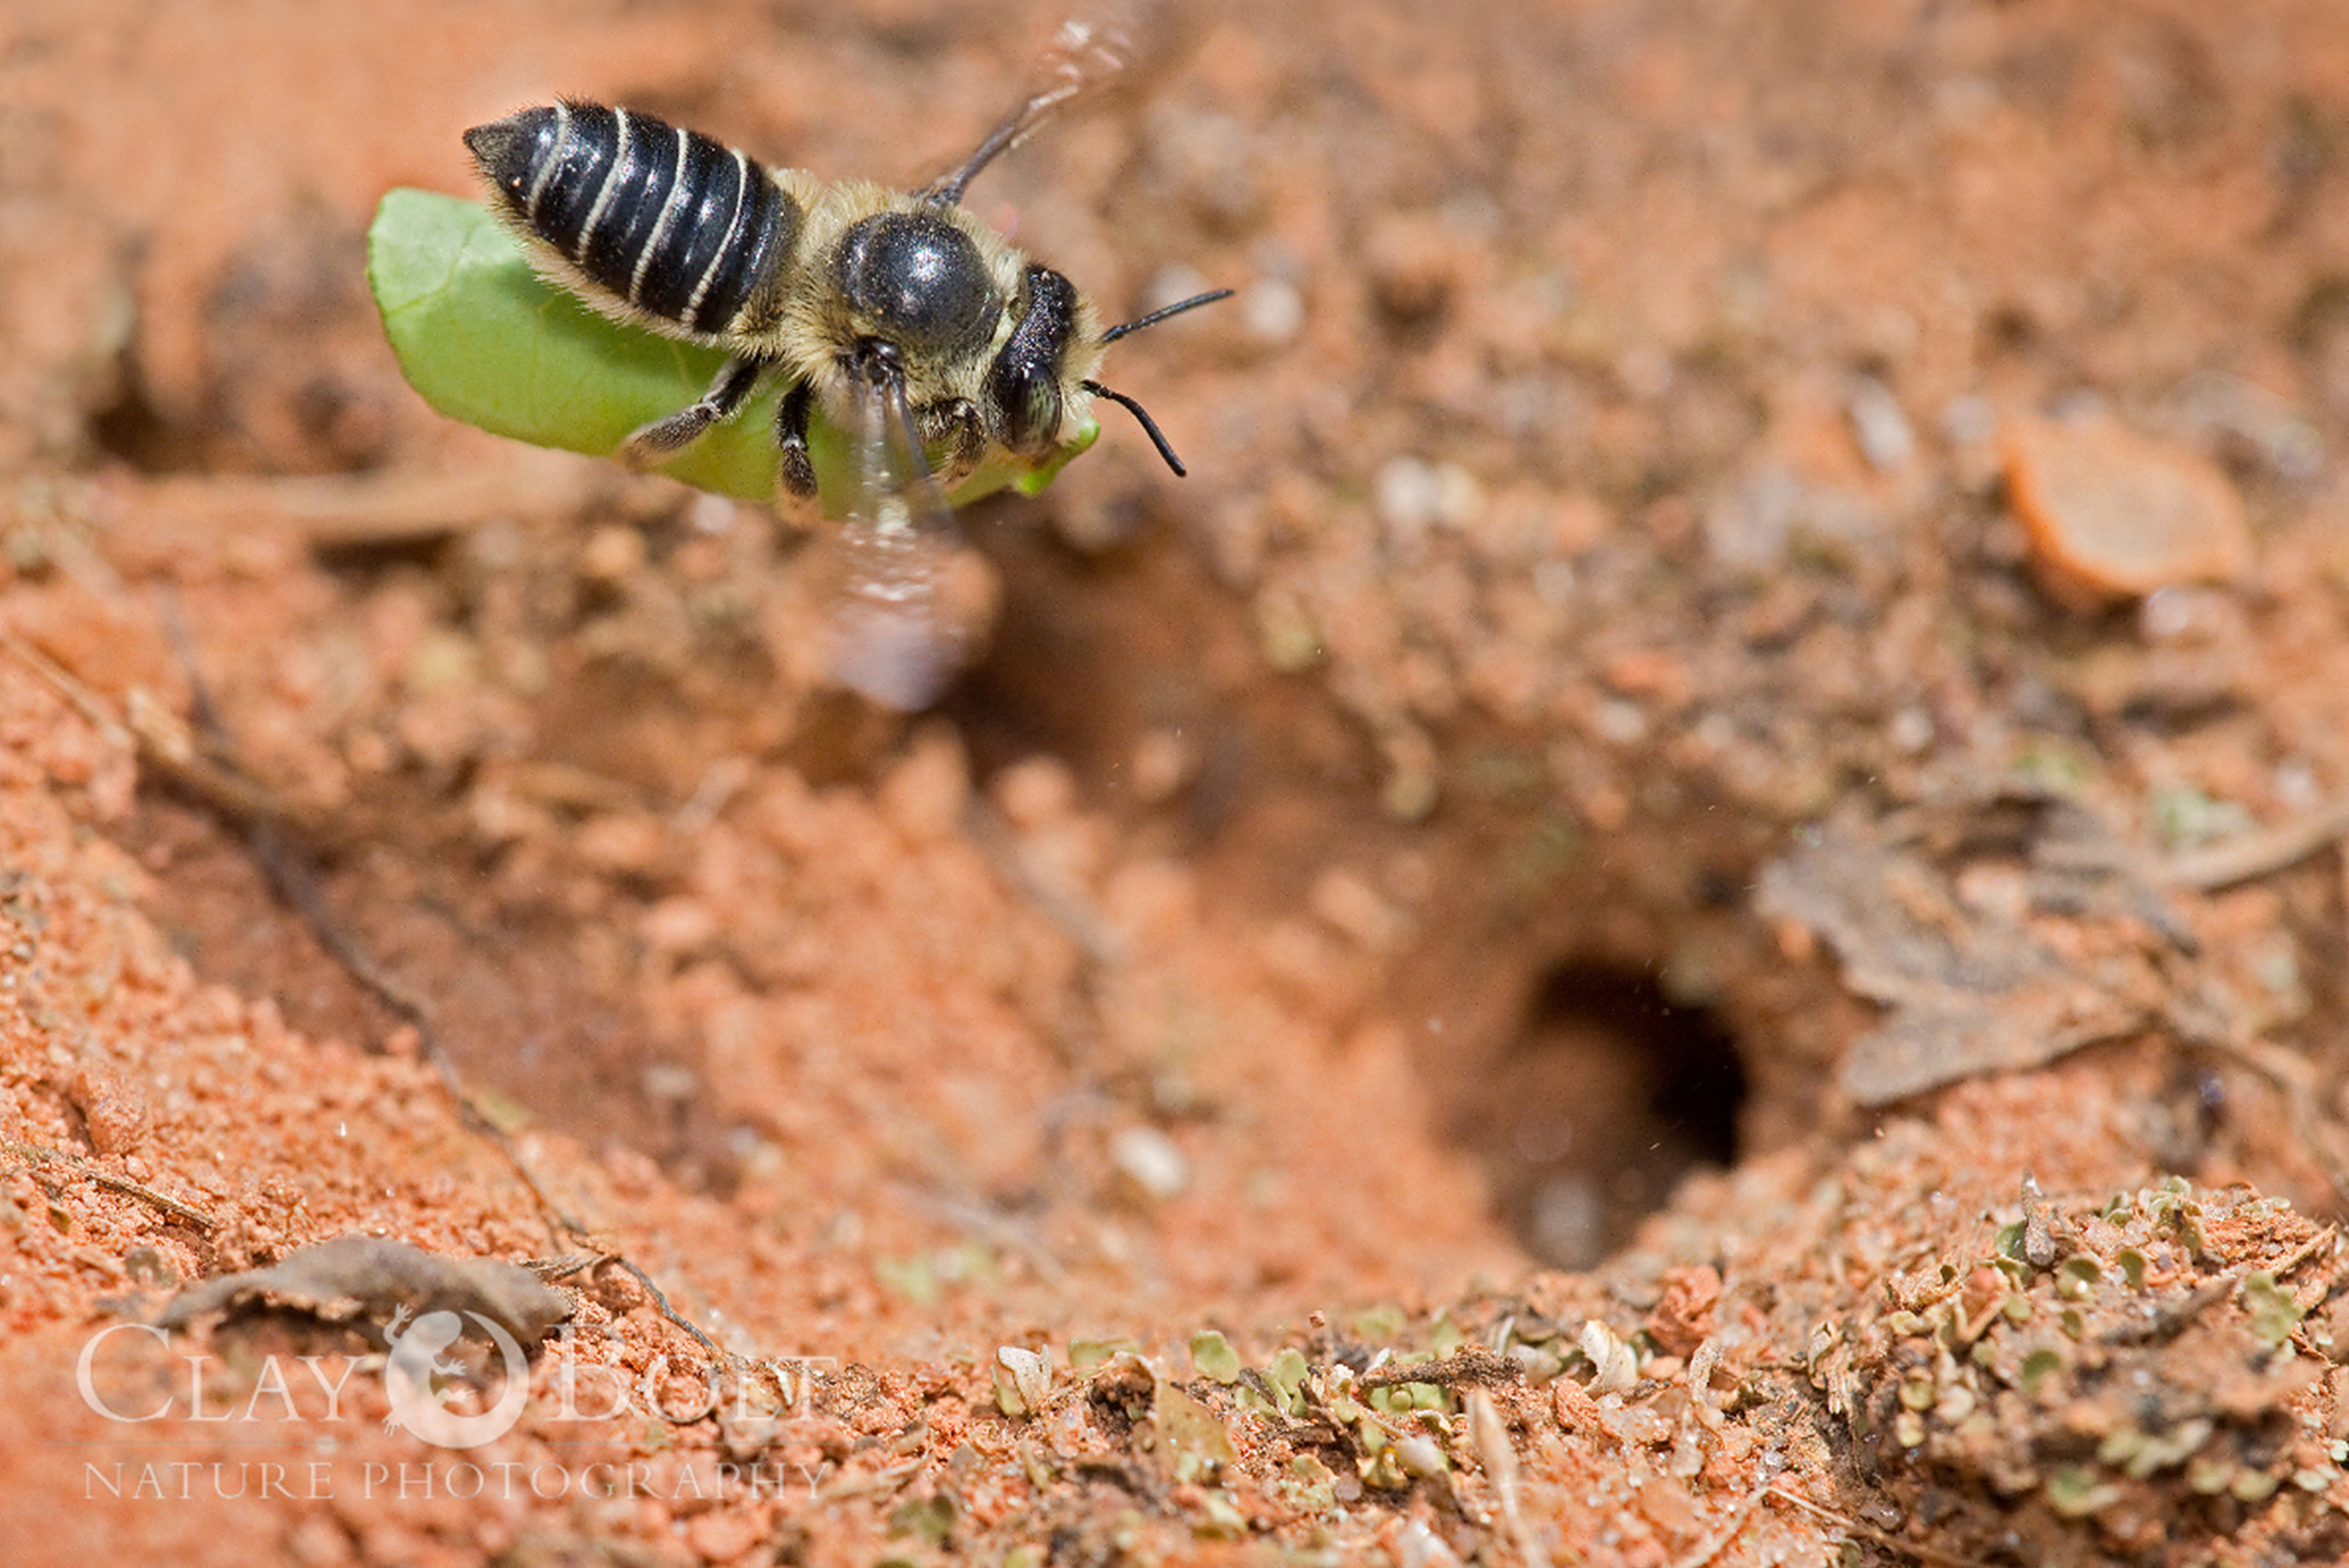  A female leafcutter bee carries a piece of leaf into her nest, which she'll use to construct a chamber for her young.&nbsp; 